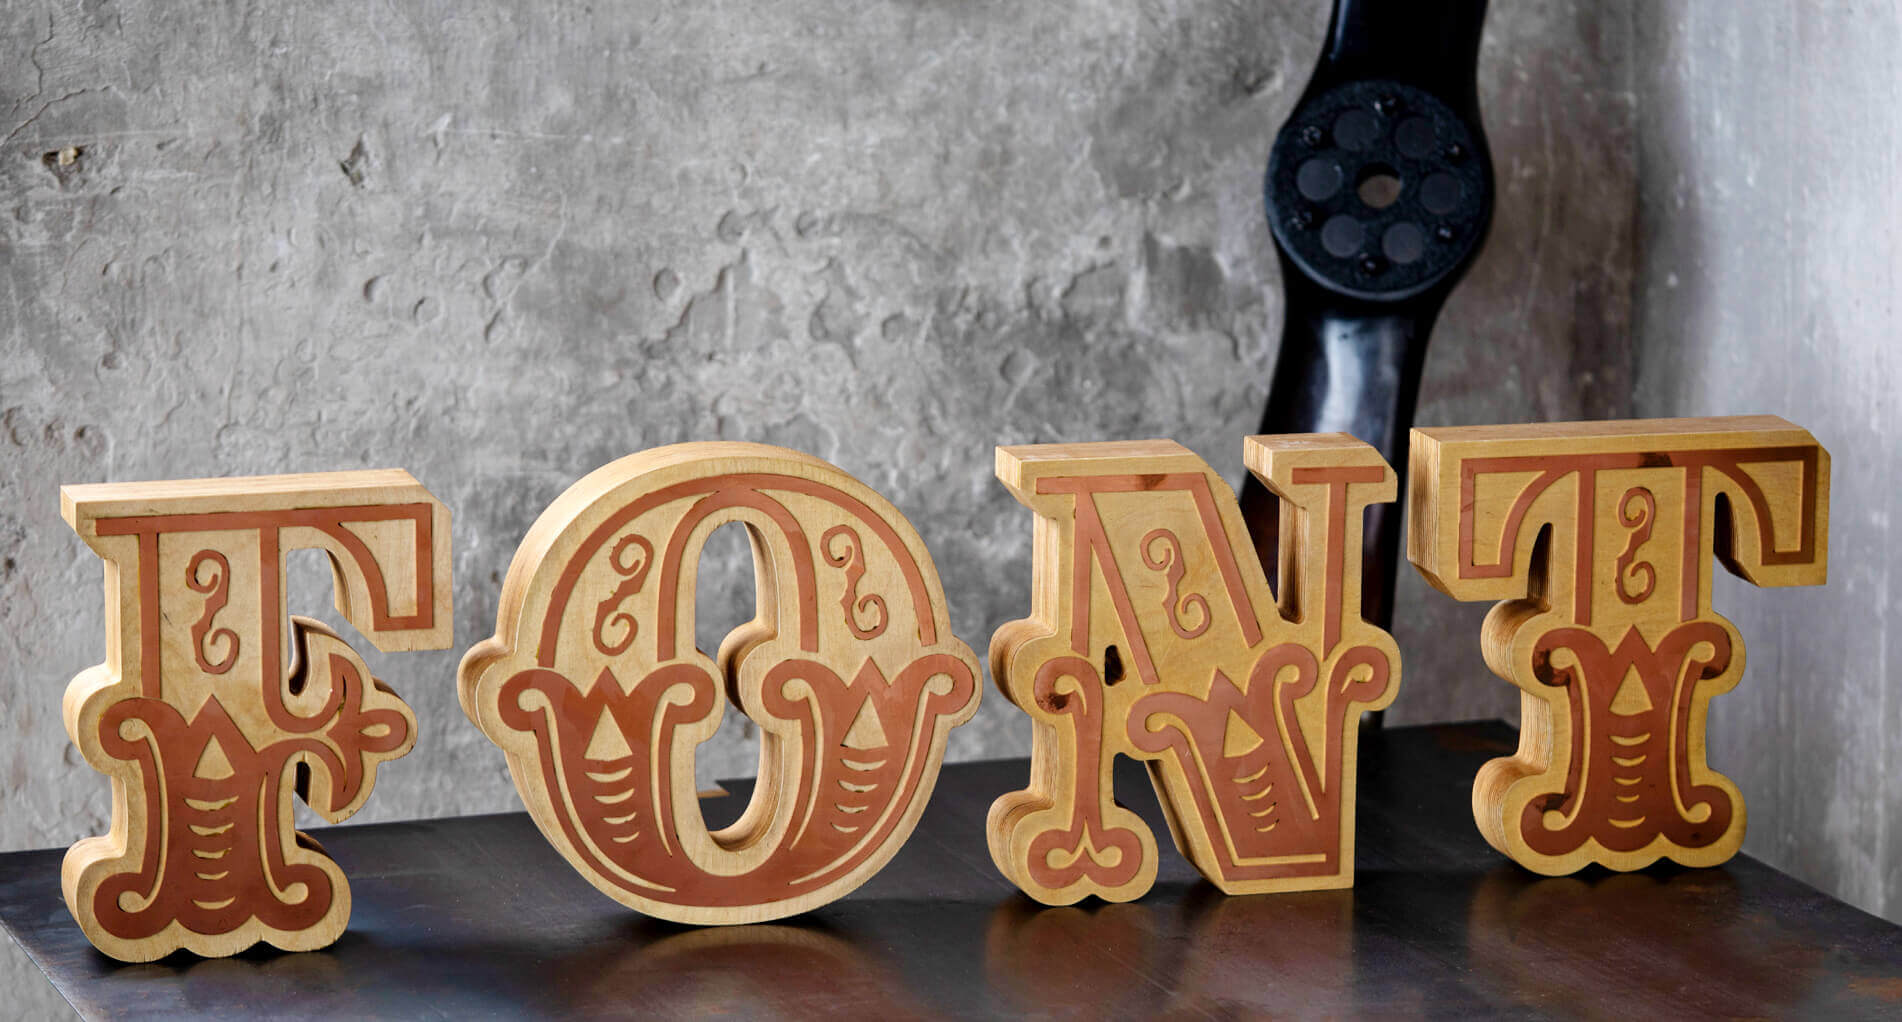 police-lettering - font;wood-decorative letters-copper-decorative letters-decorative-design-wood